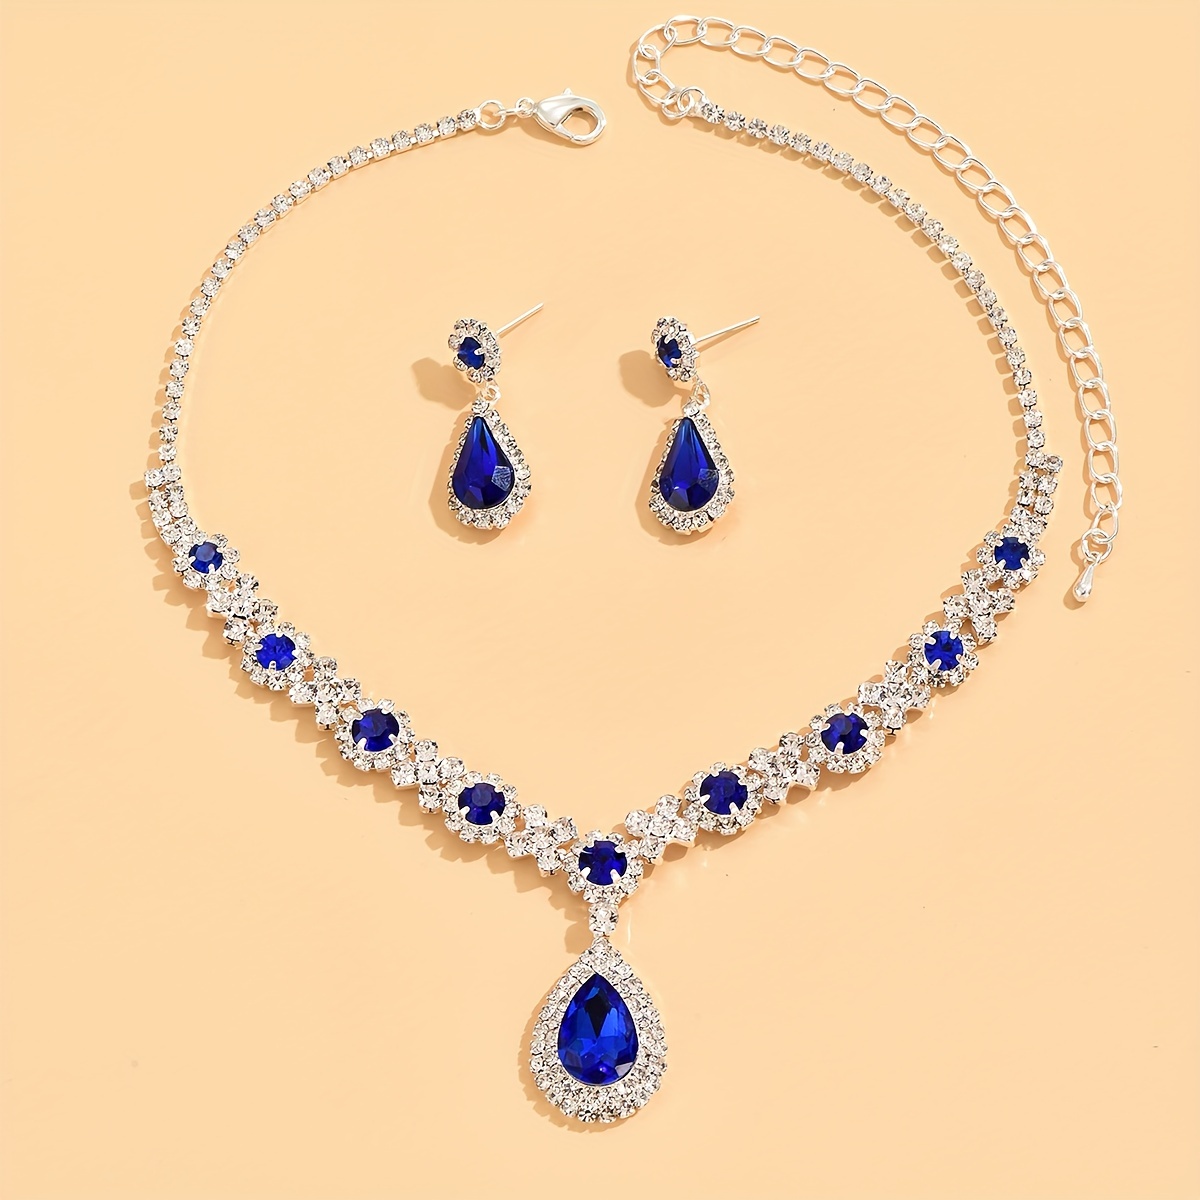 wedding bridal jewelry set with pendant necklace dangle earrings inlaid synthetic gems shiny jewelry set 7